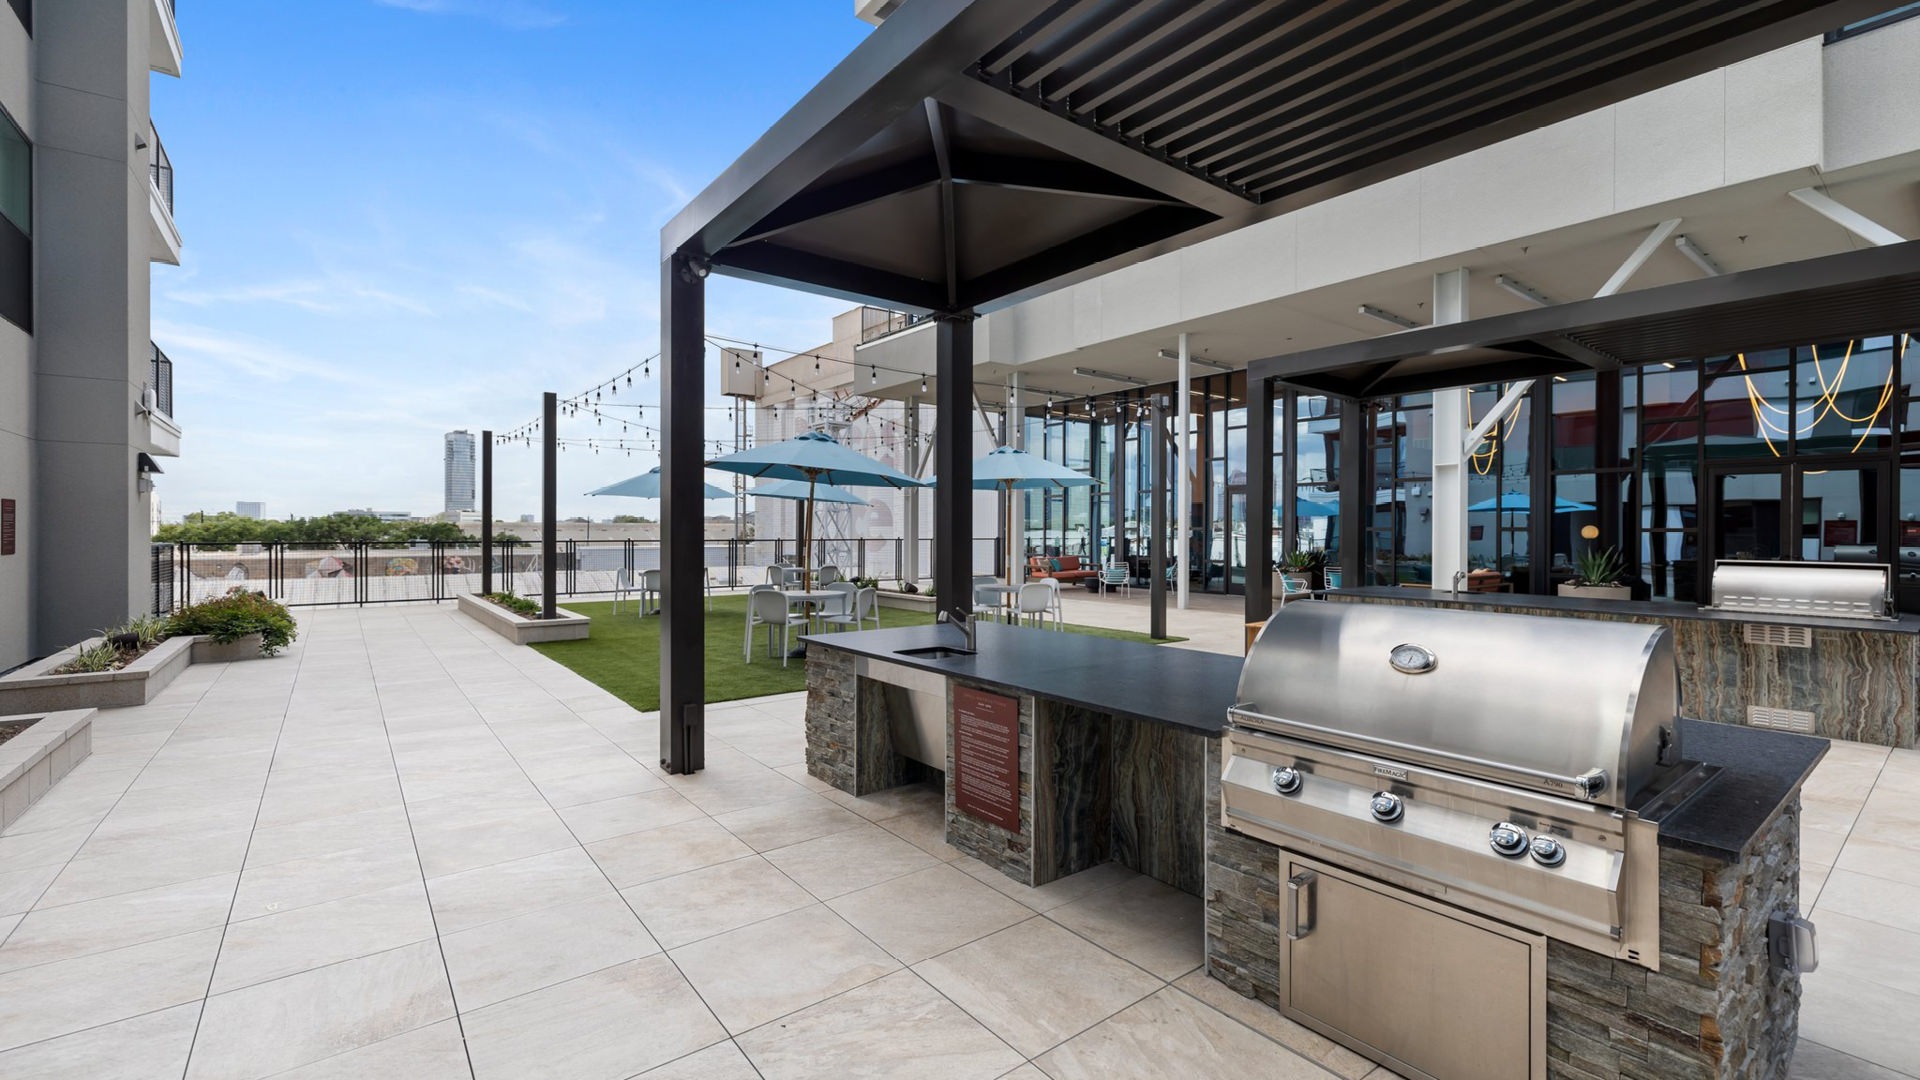 Outdoor Kitchen with grills and outdoor seating